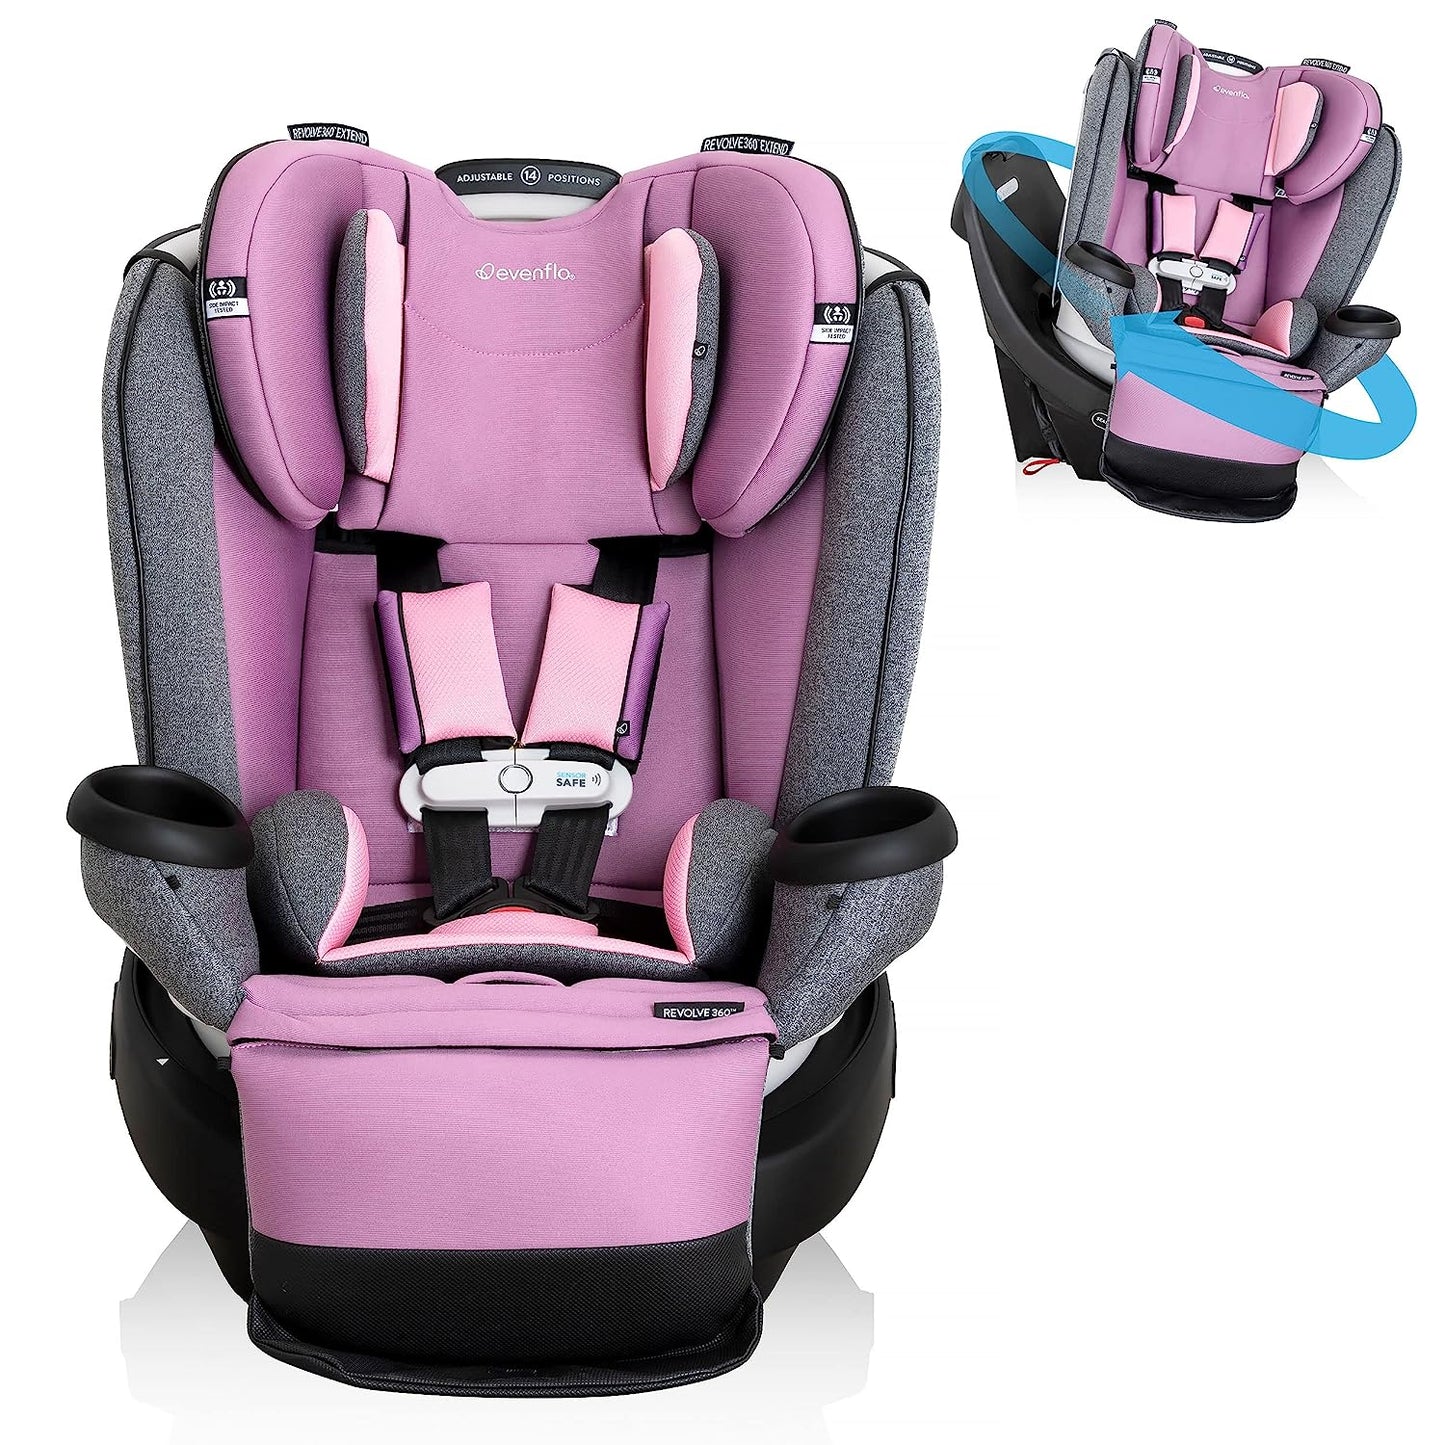 Evenflo Gold Revolve360 Extend All-in-One Rotational Car Seat (Opal Pink)